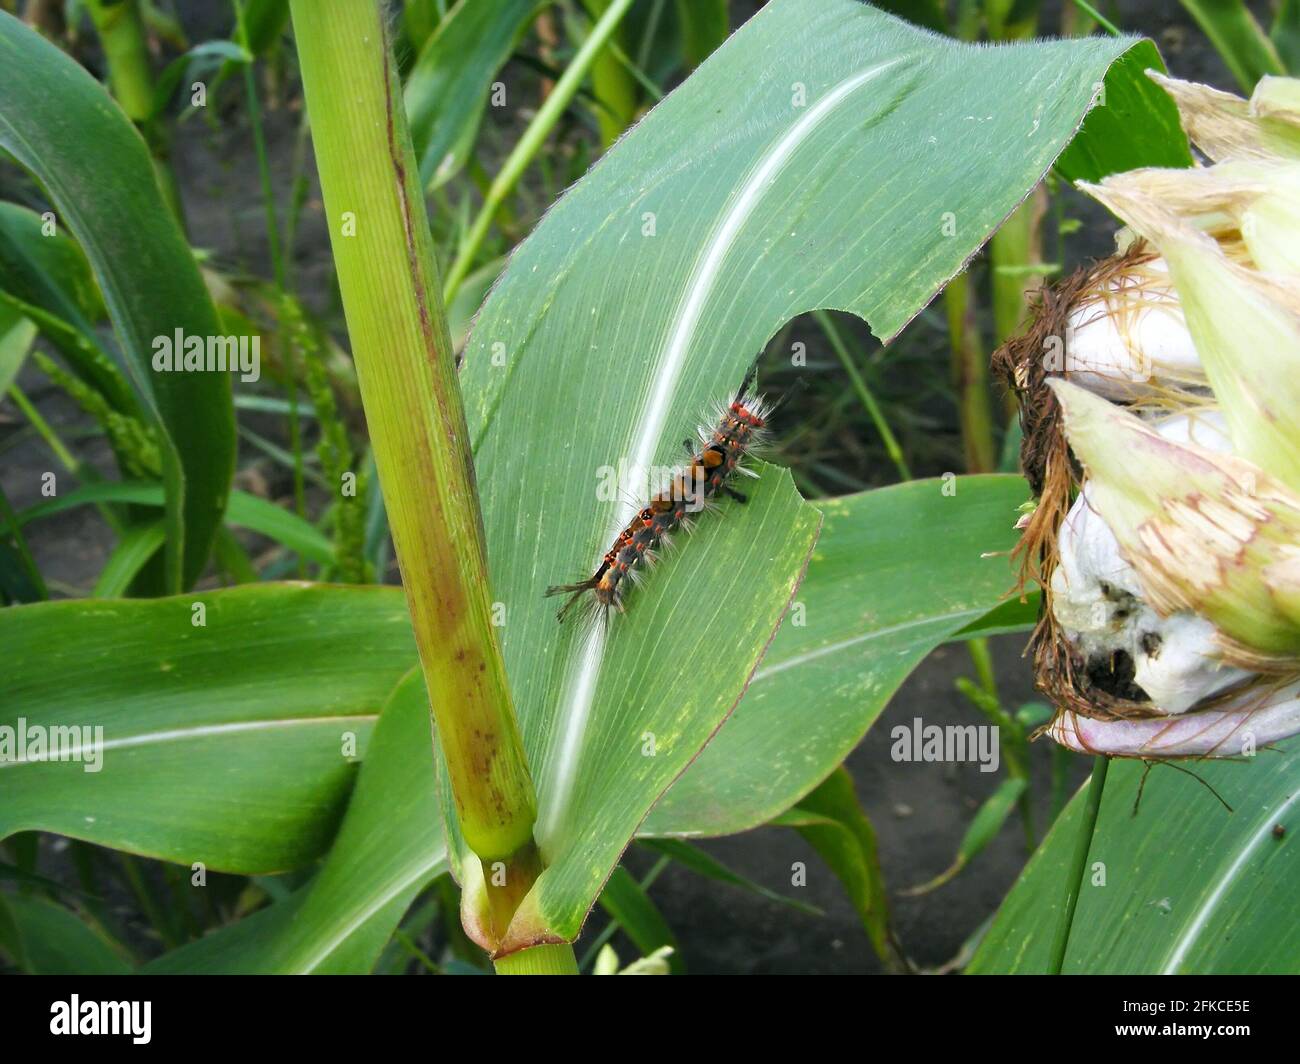 Caterpillar of Orgyia antiqua the rusty tussock moth or vapourer on damaged leaves of corn plants. It is a moth in the family Erebidae. Stock Photo